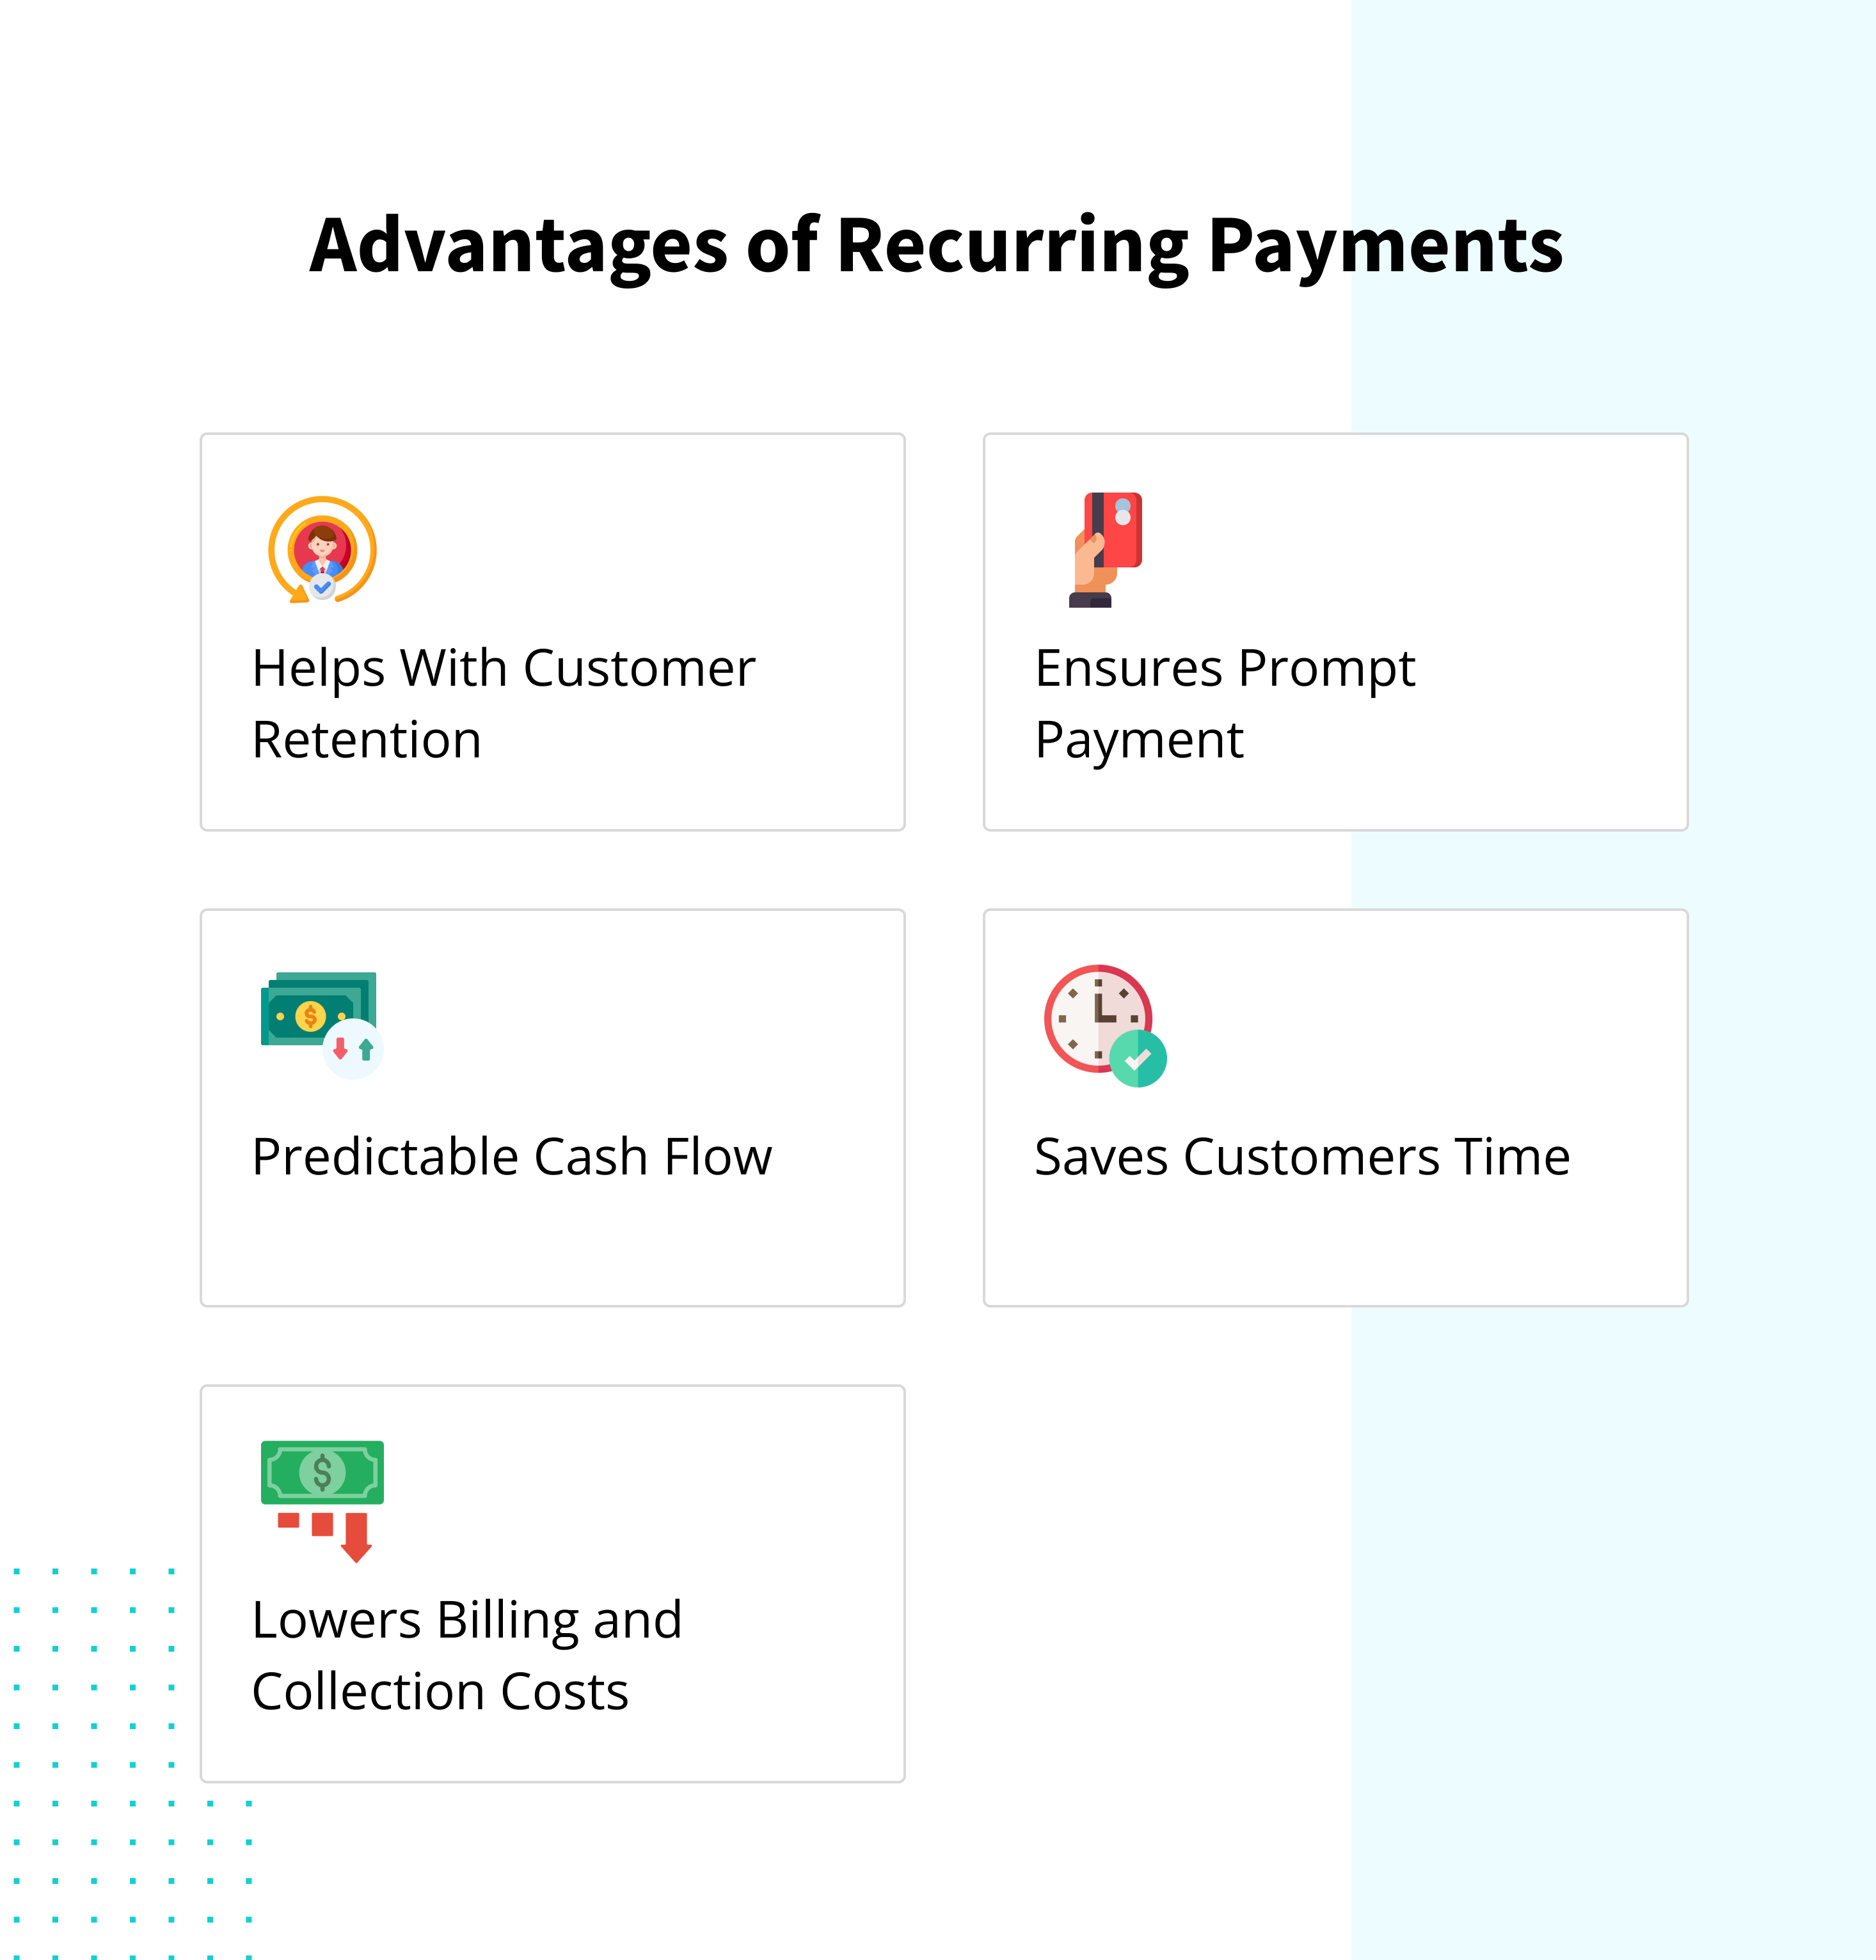 Advantages of Recurring Payments